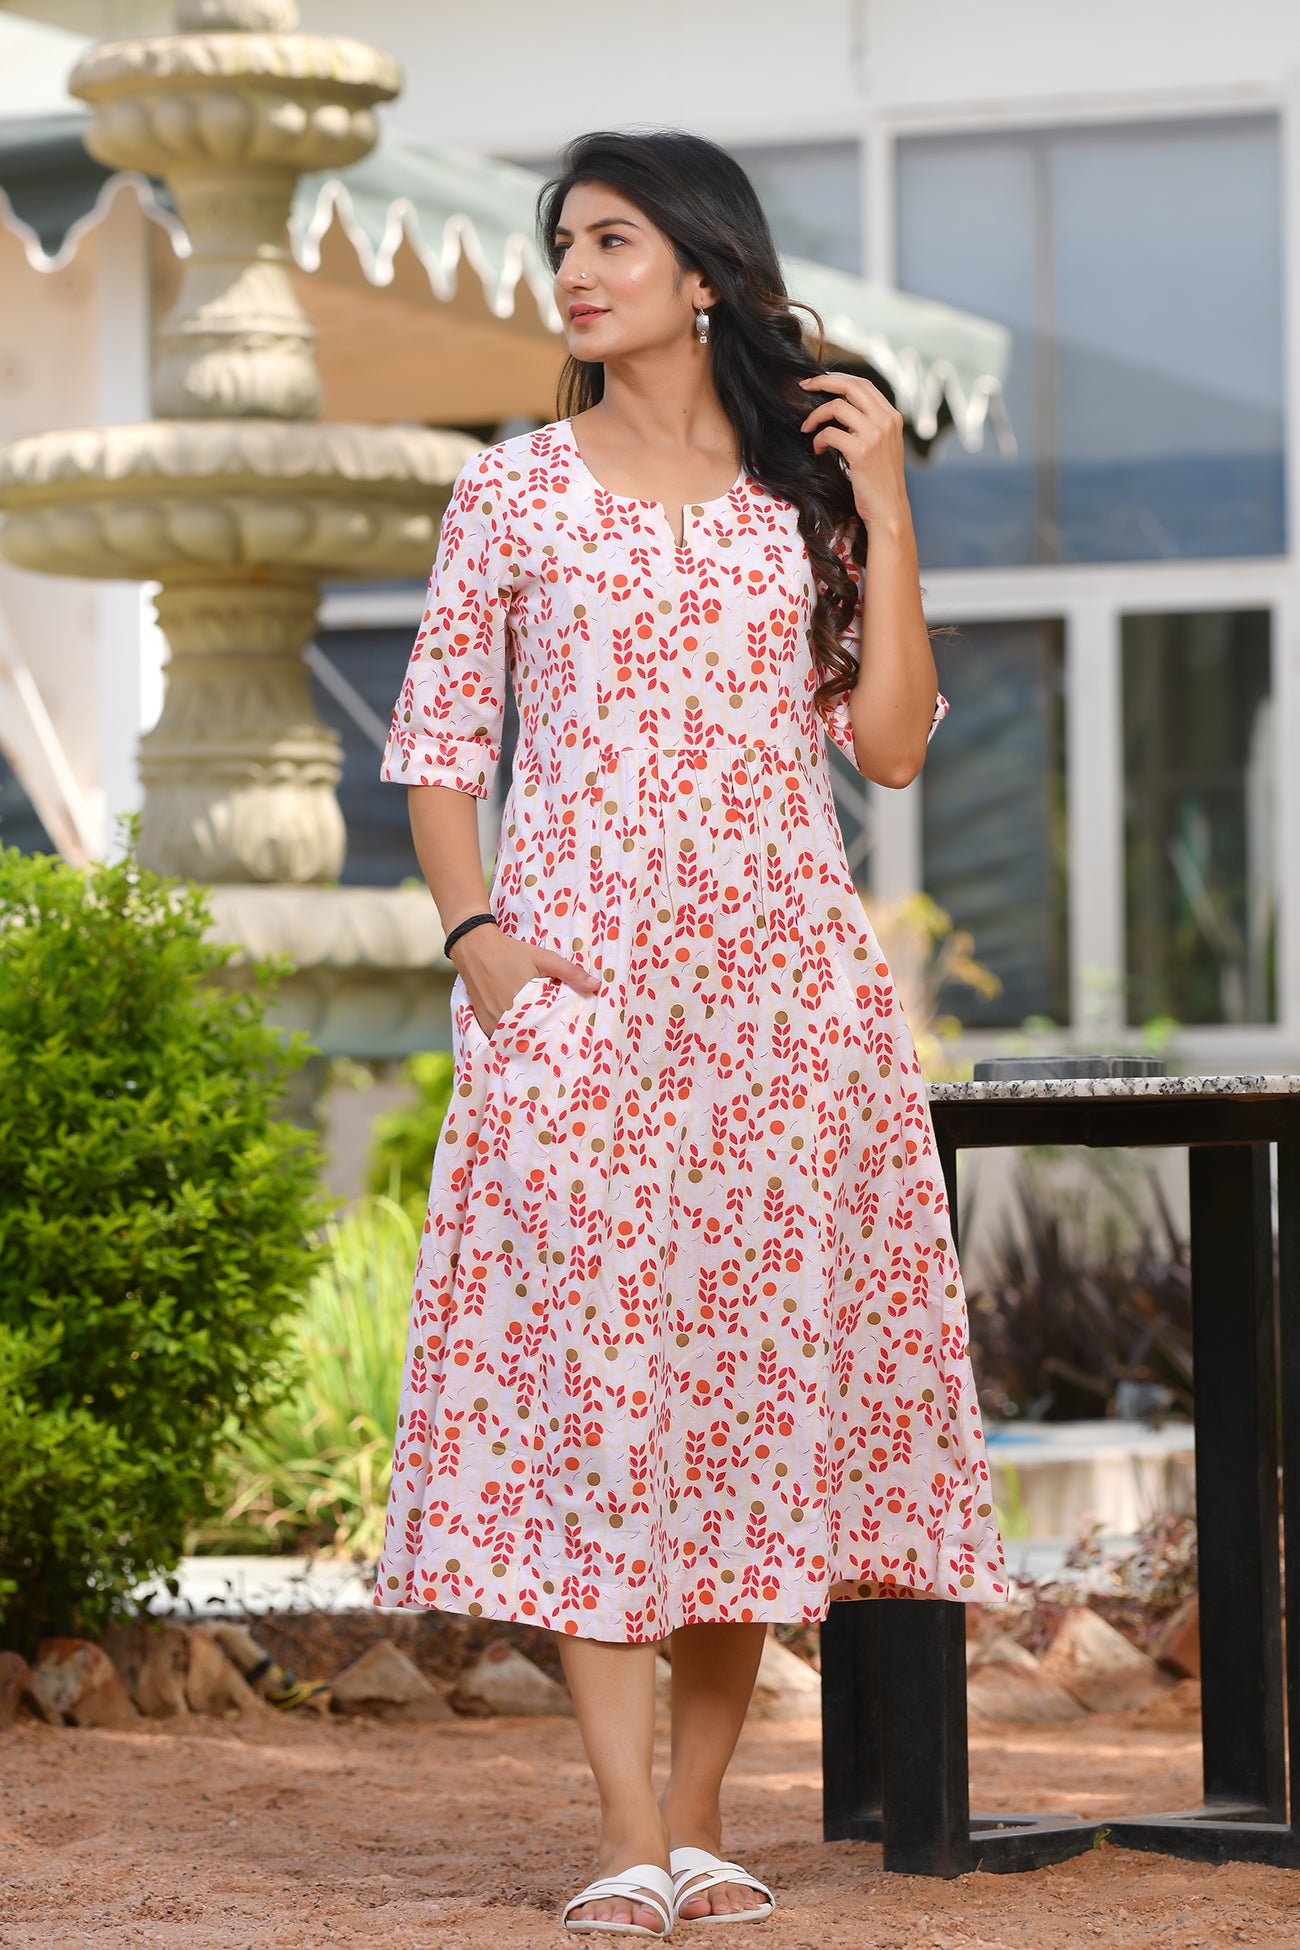 Cotton Printed Maxi Dress Look simply beautiful adorning this floraprint   cottondress Crafted in finest fabric and st  Maxi dress Printed maxi  dress Fashion